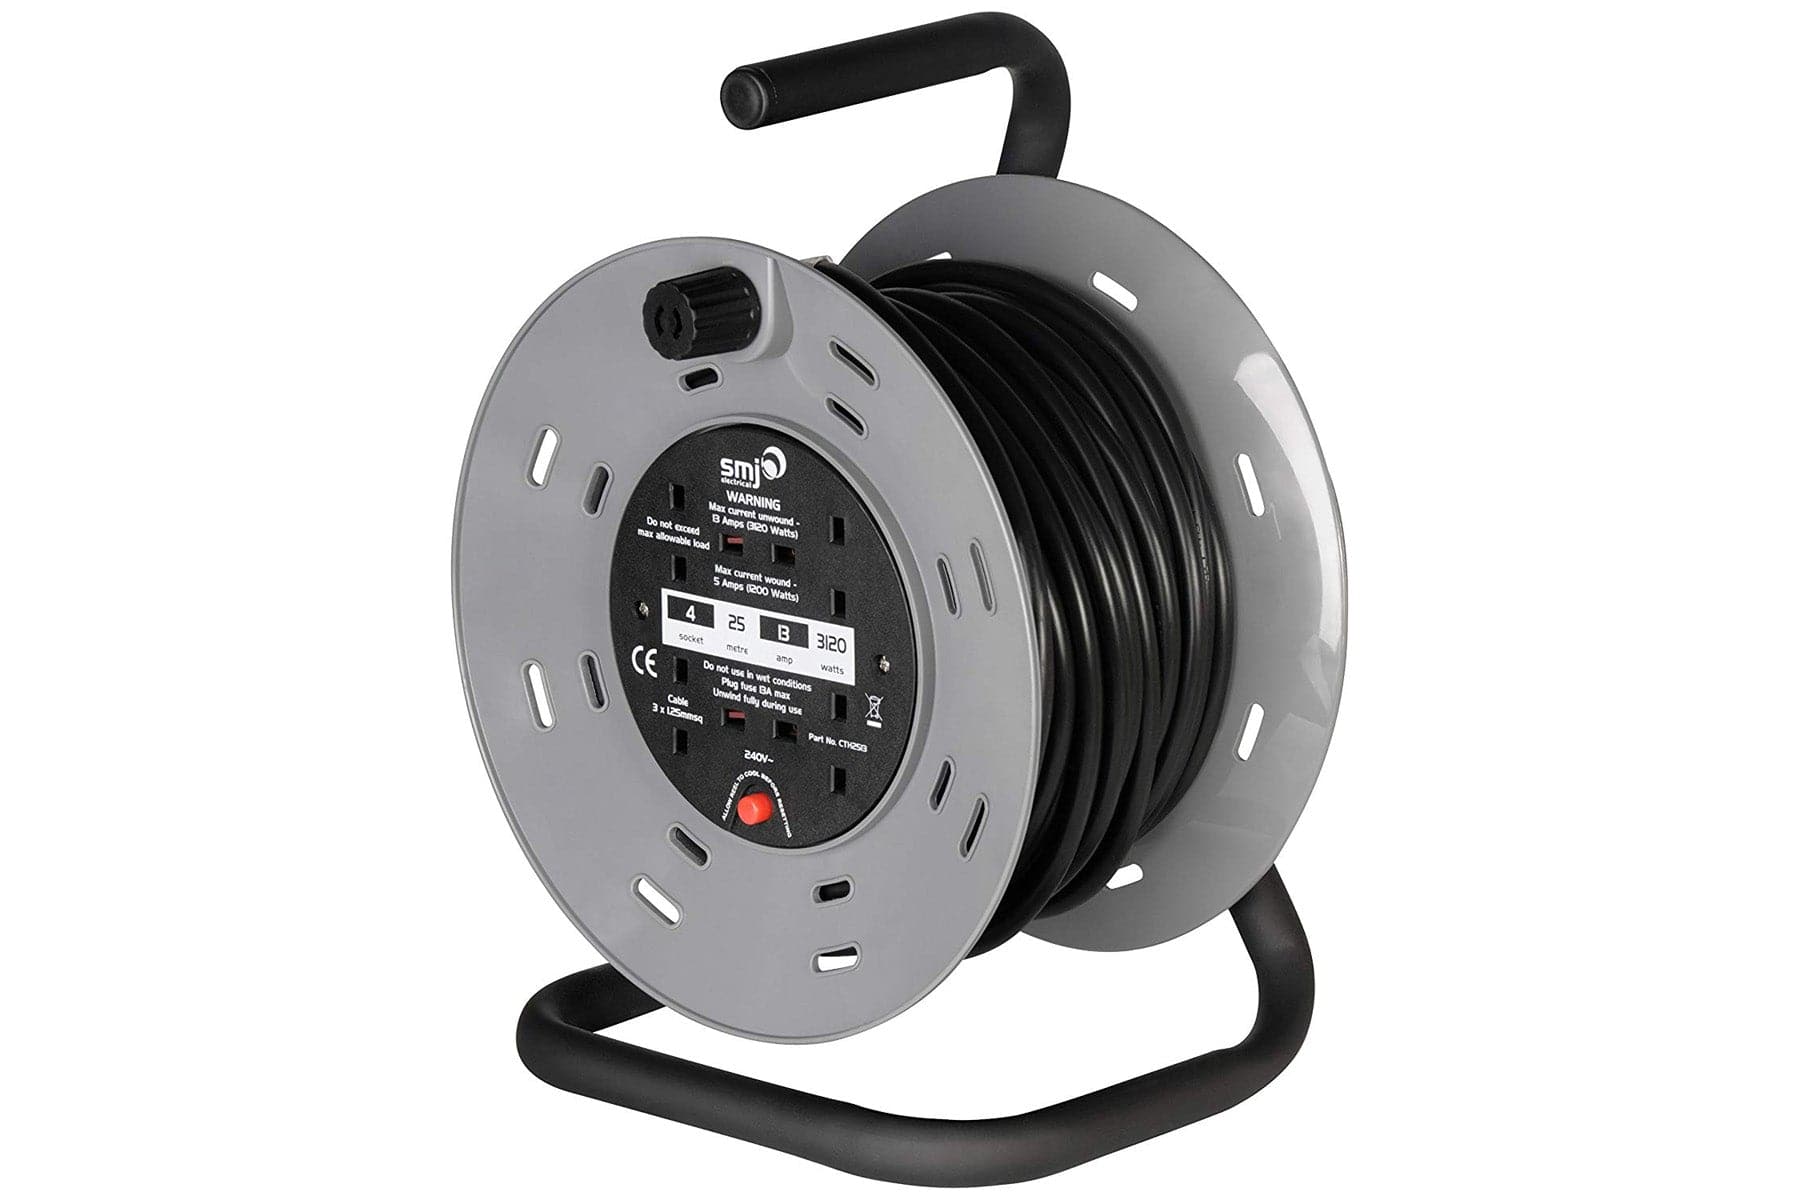 SMJ Electrical 25m 4-Socket 13A Heavy Duty Steel Frame Extension Cable Reel